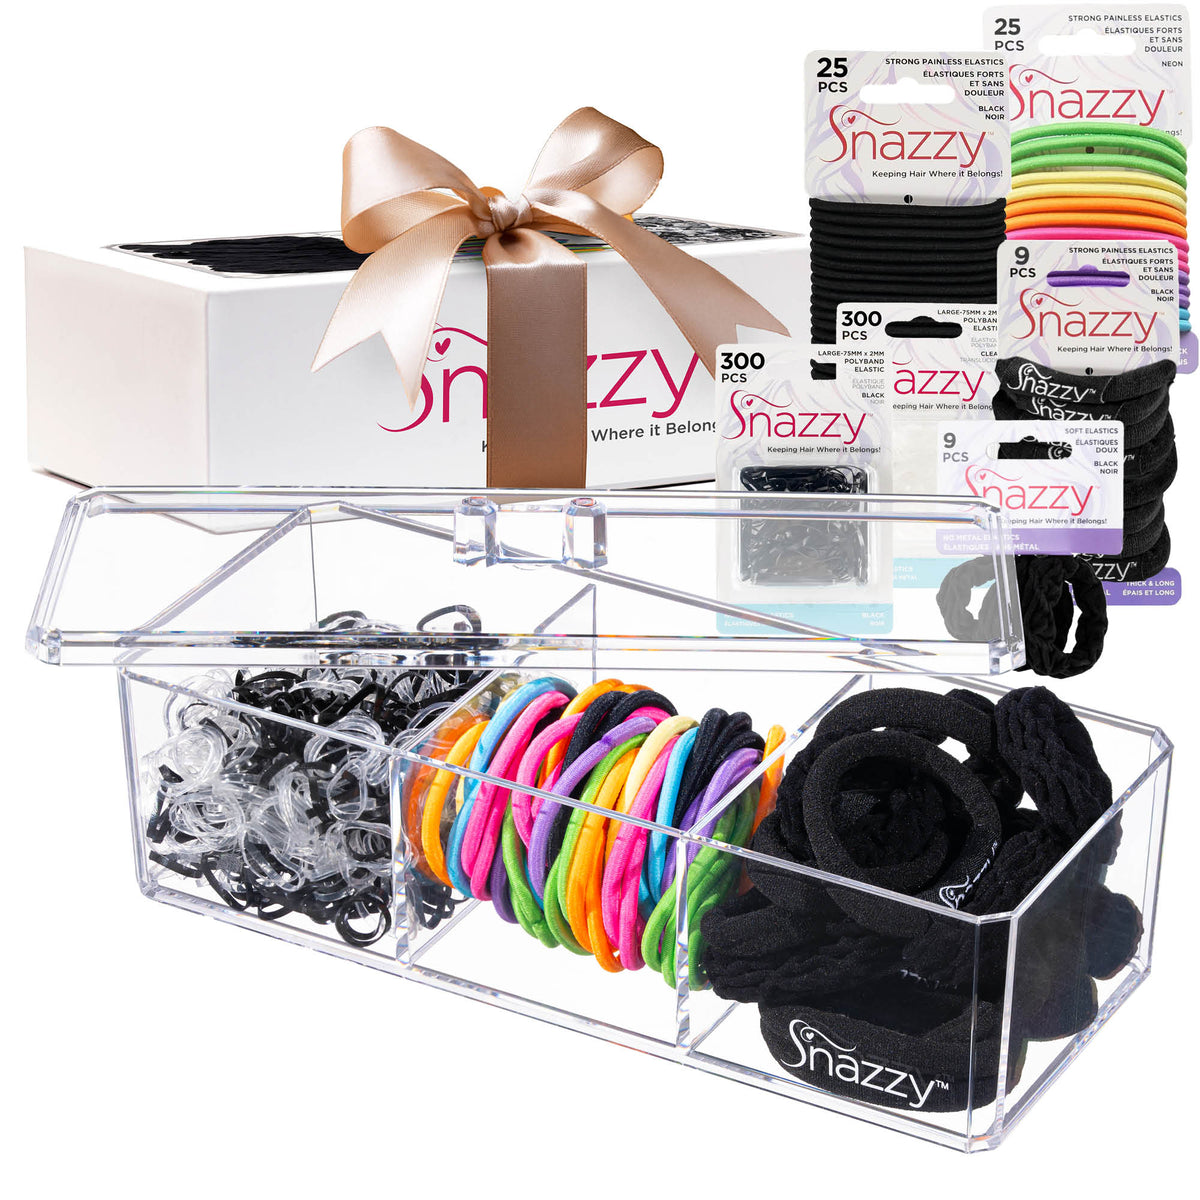 Snazzy - Deluxe Hair Accessories for Women Gift Set - 670 Total Hair Accessories for Girls, Teens & Adults - Mini Scrunchies, Women's Hair Elastics & Ponytail Holders in Storage Container Kit